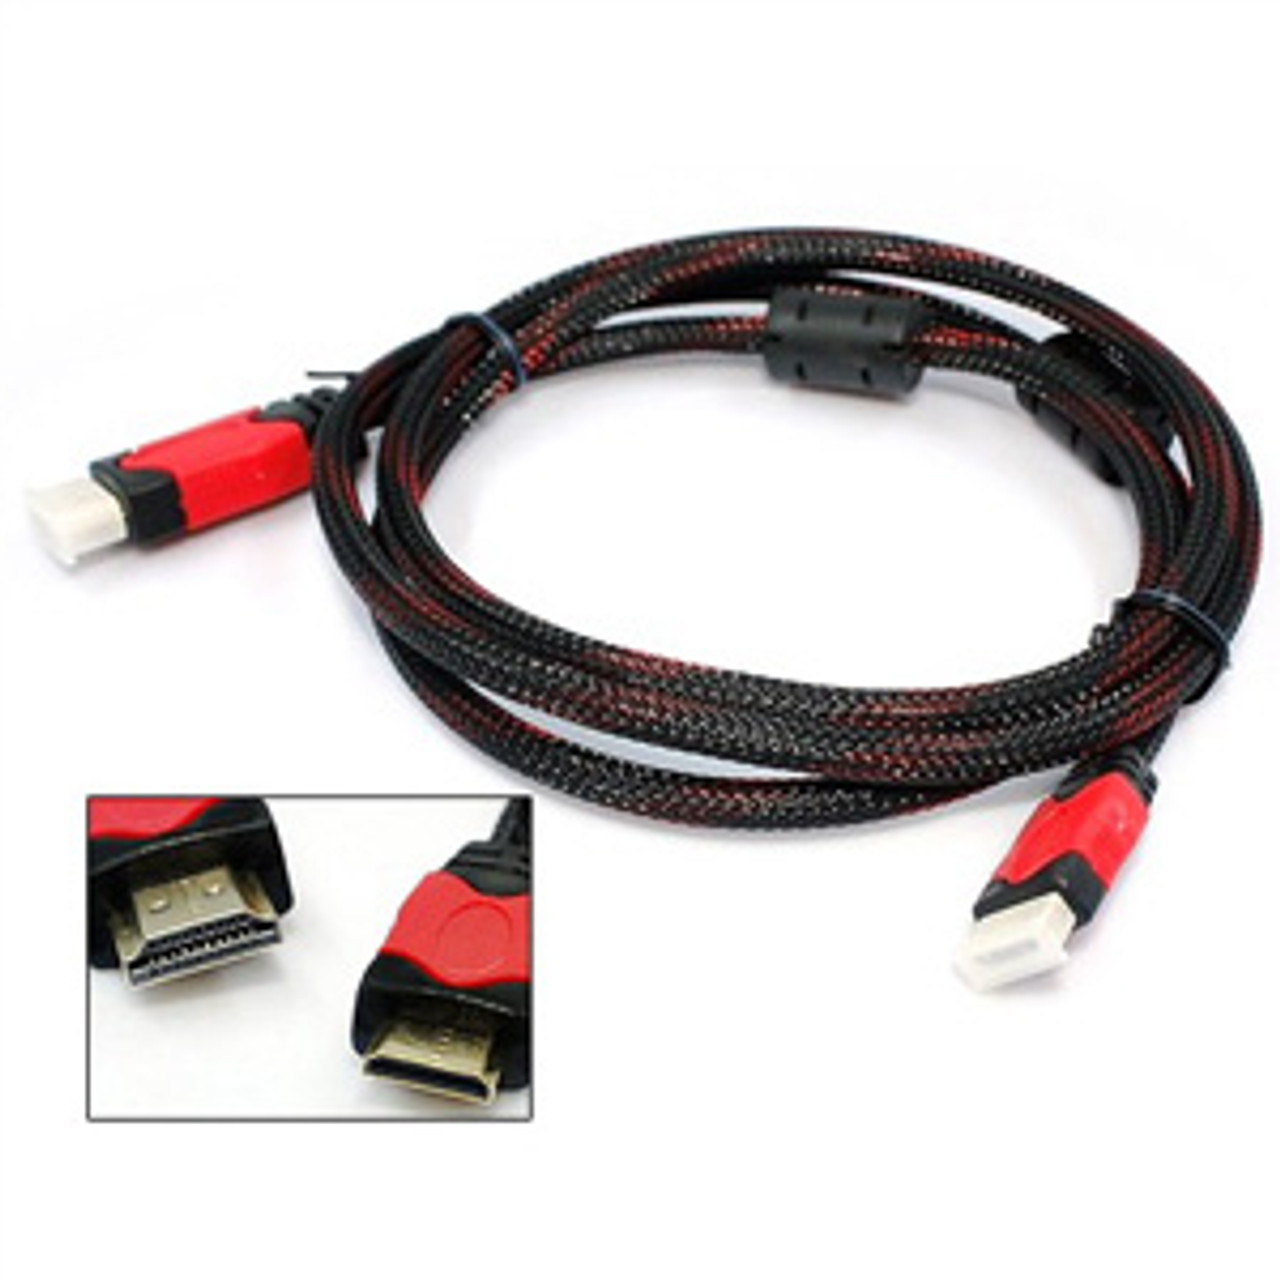 HDMI 5M Cable, AYOUB COMPUTERS